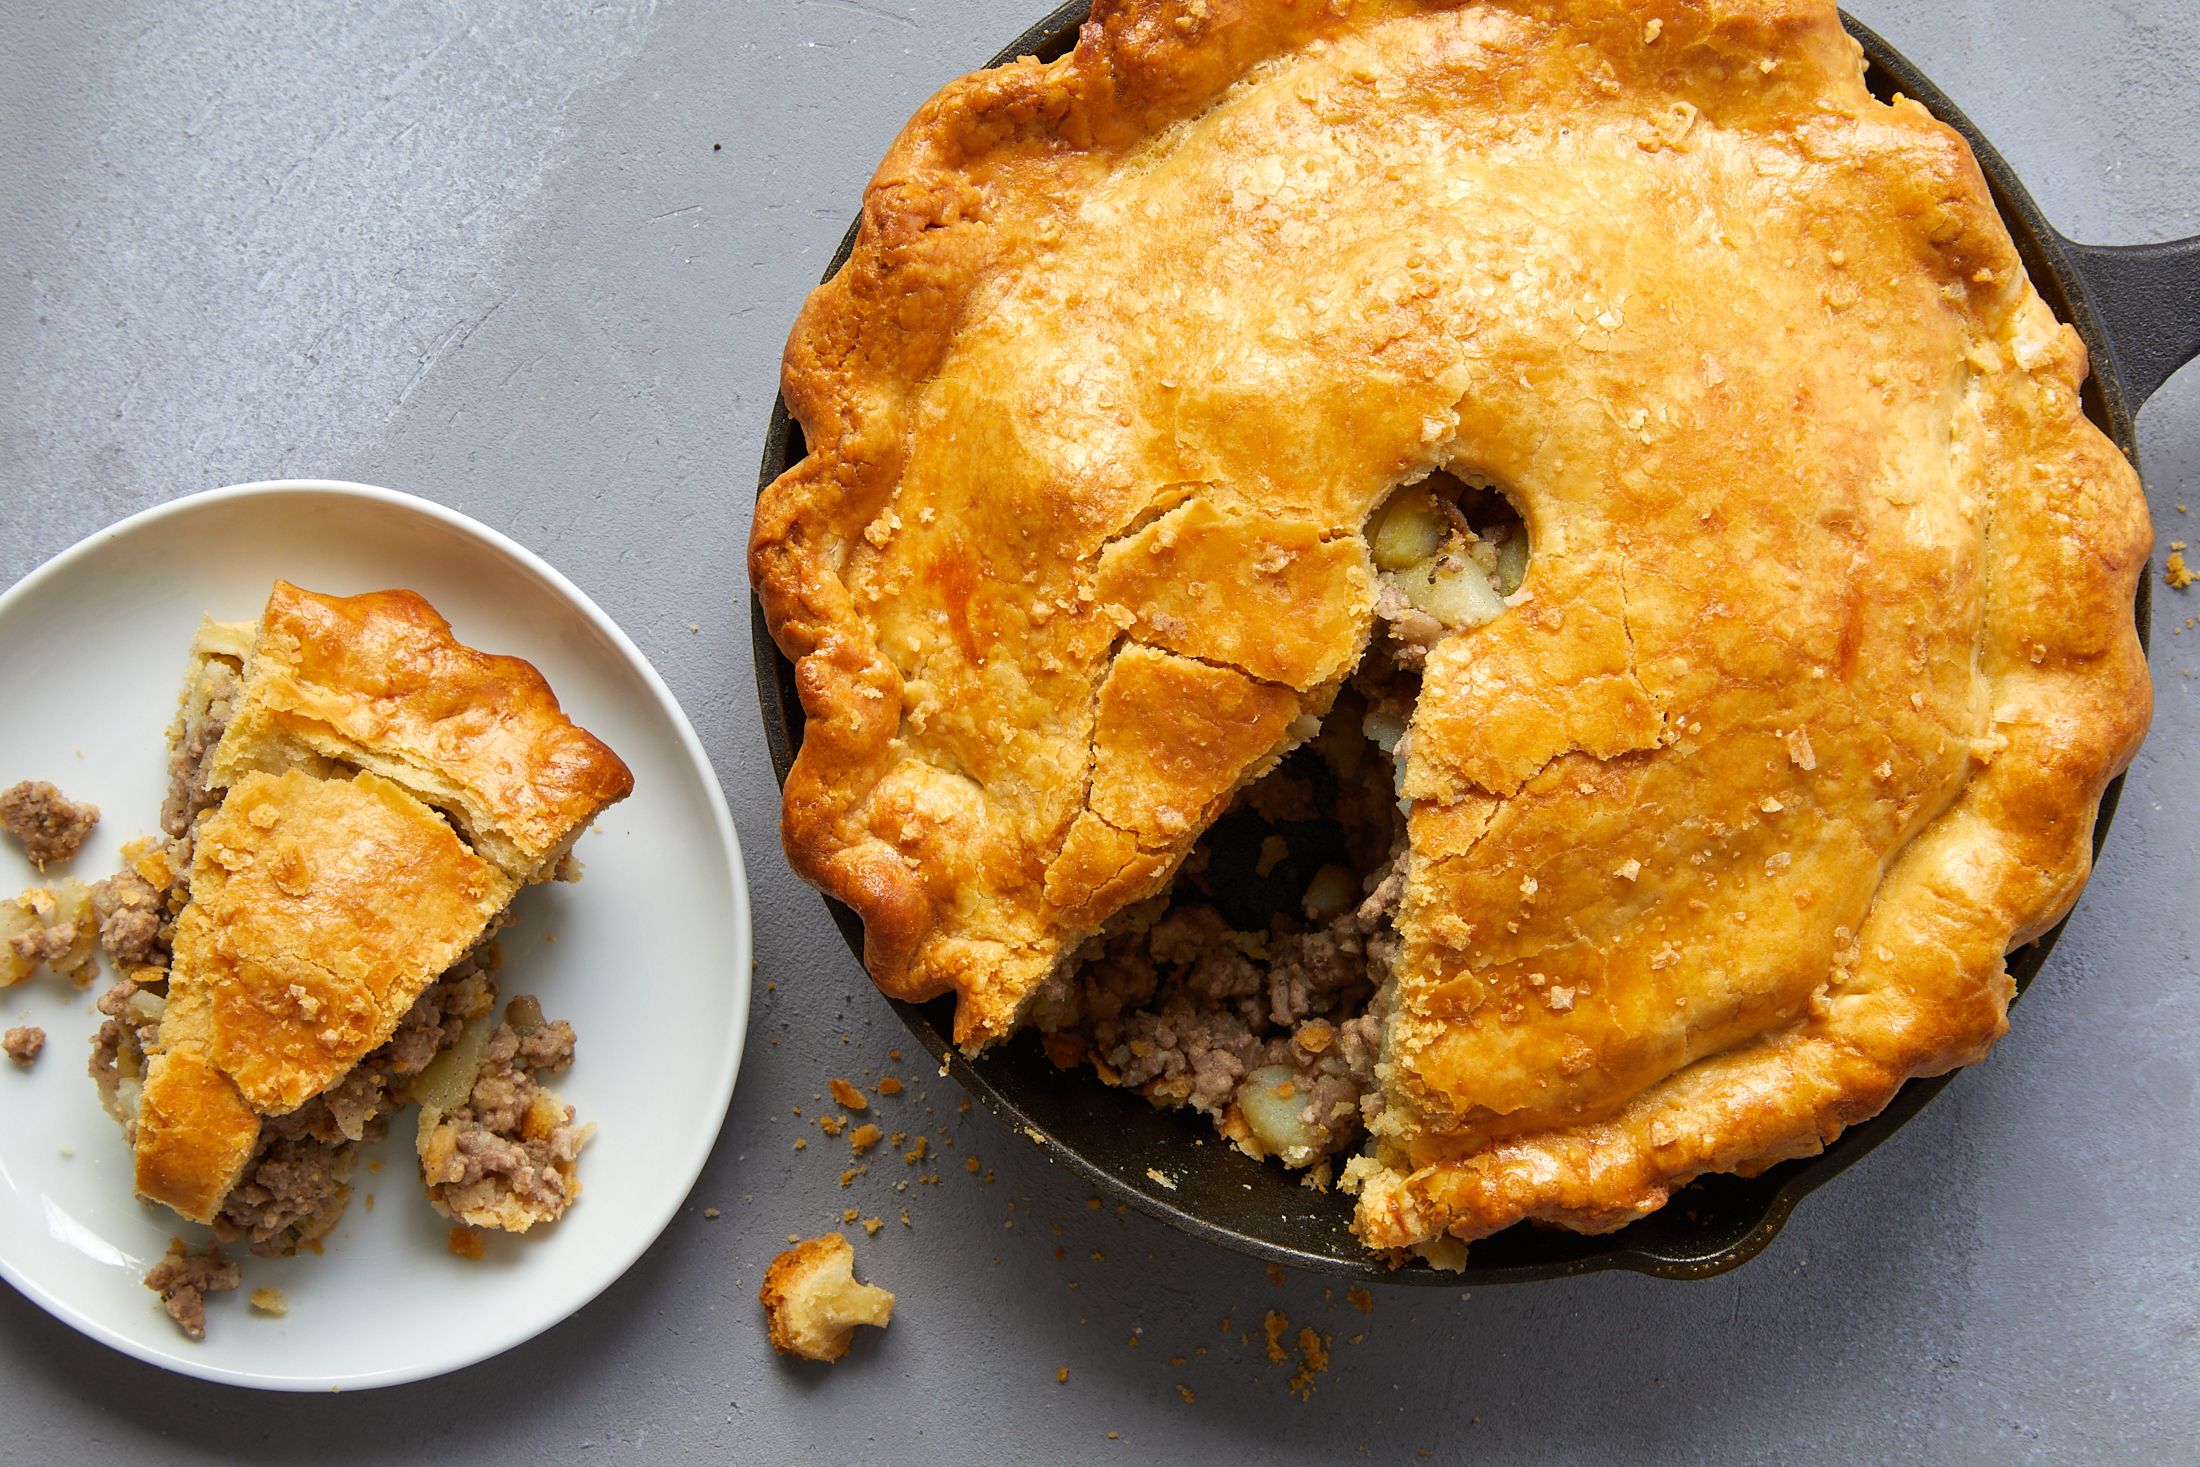 Best Tourtiere Recipe - How to Make Tourtiere Meat Pie